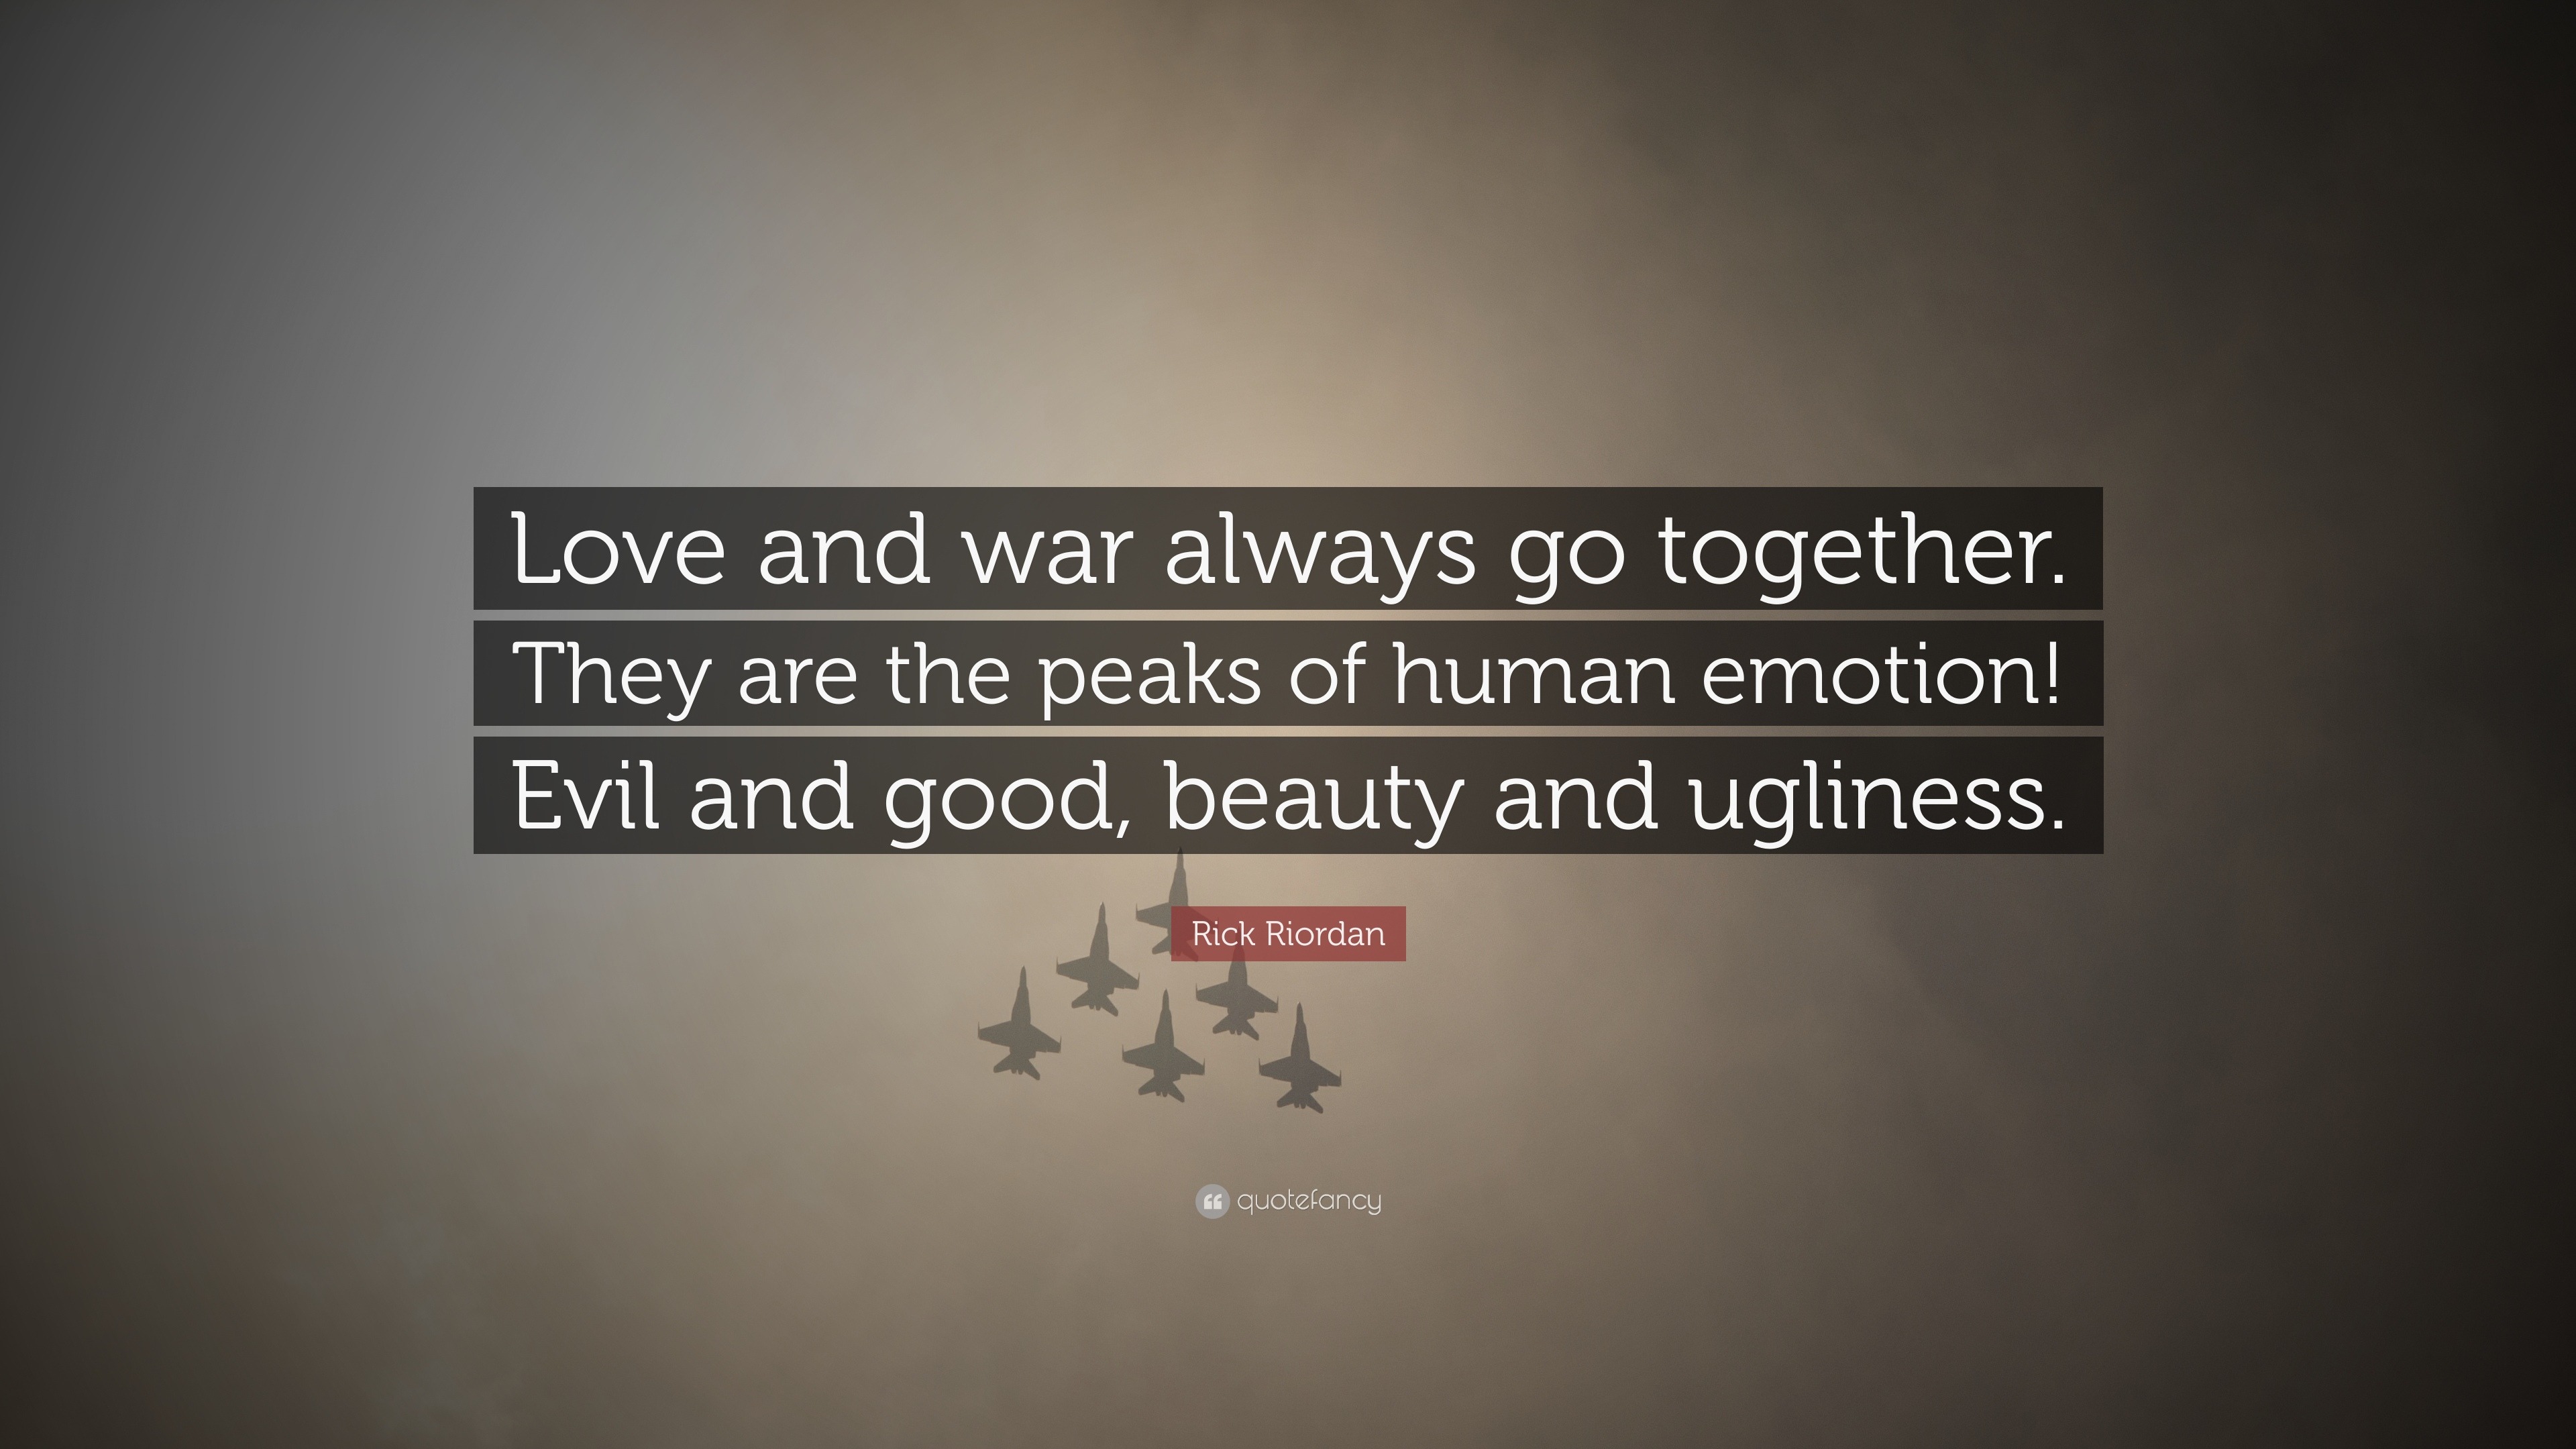 Rick Riordan Quote Love And War Always Go Together They Are The Peaks Of Human Emotion